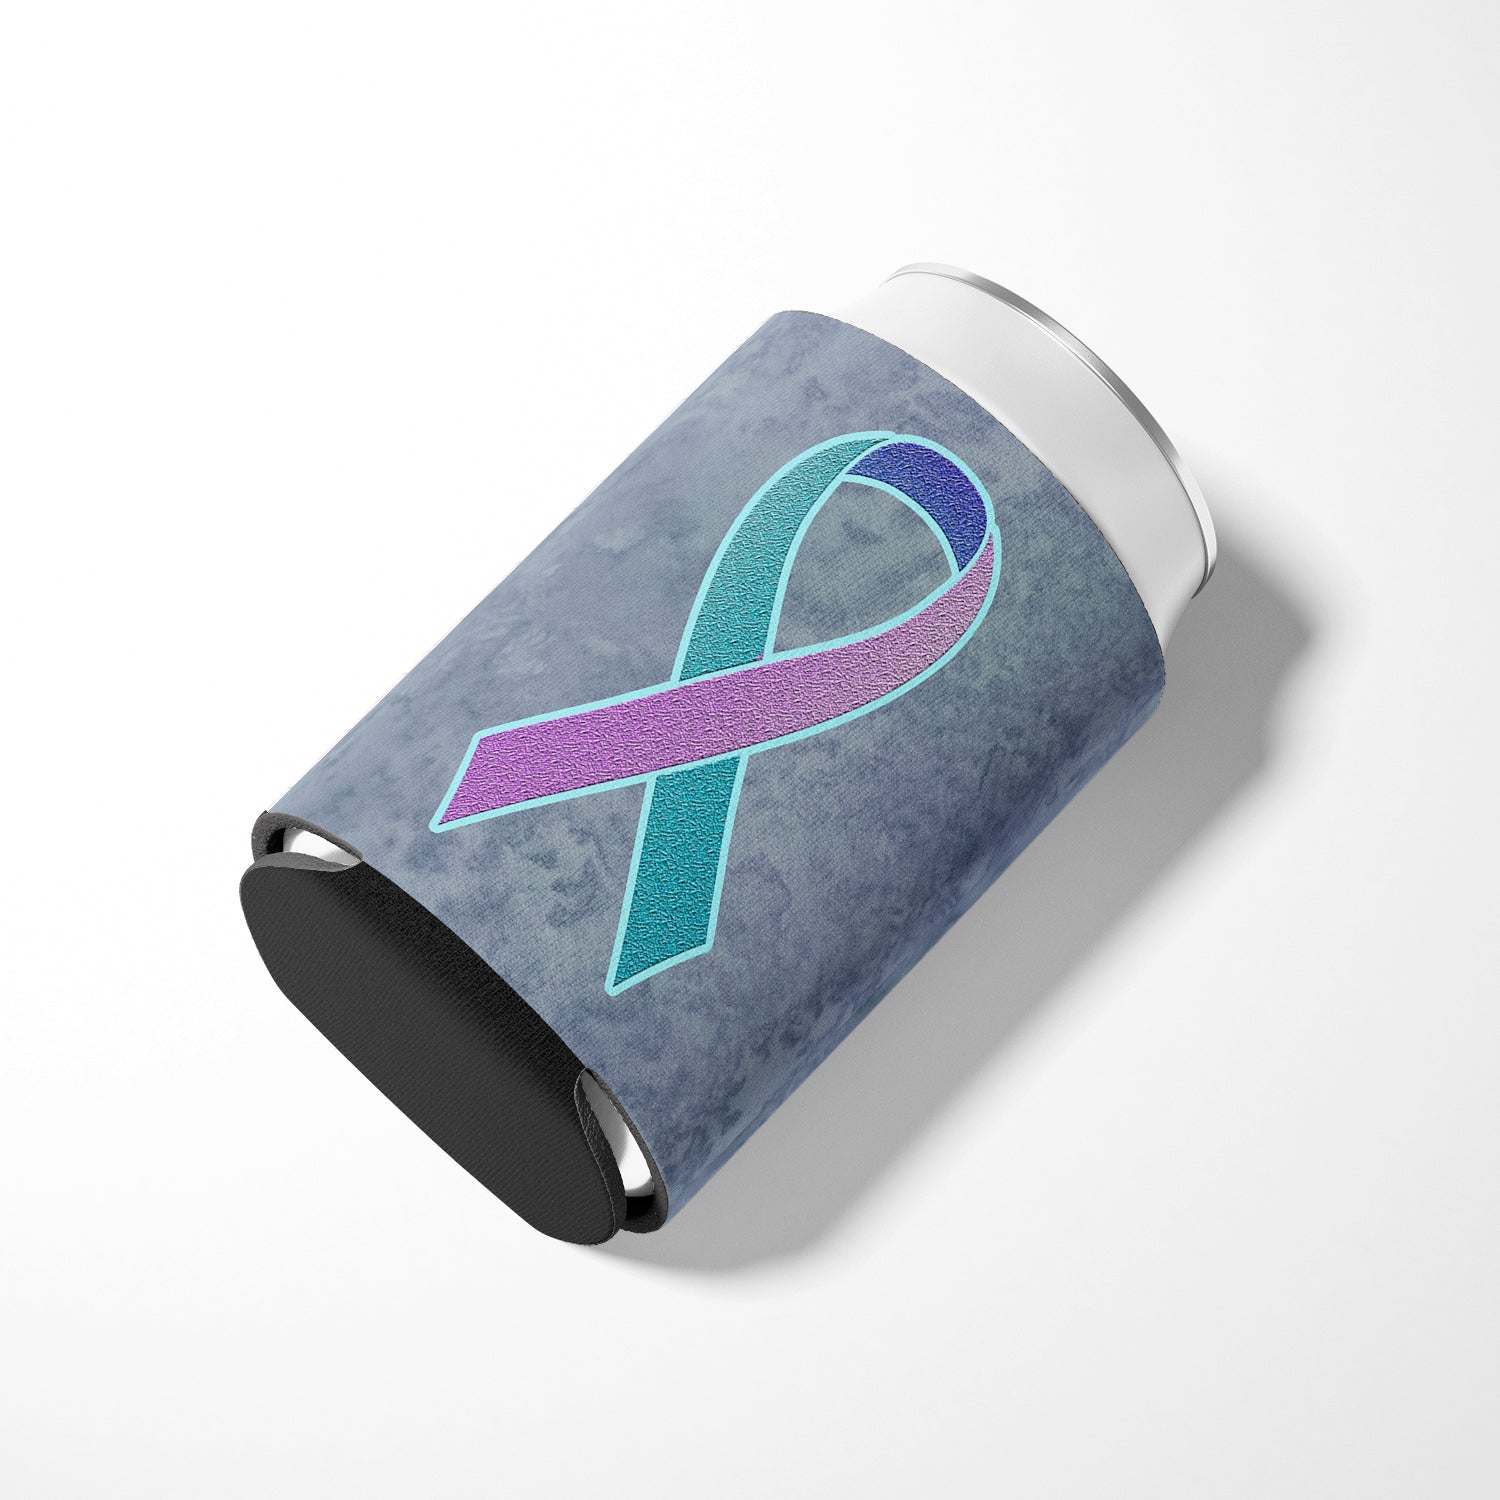 Teal, Pink and Blue Ribbon for Thyroid Cancer Awareness Can or Bottle Hugger AN1217CC